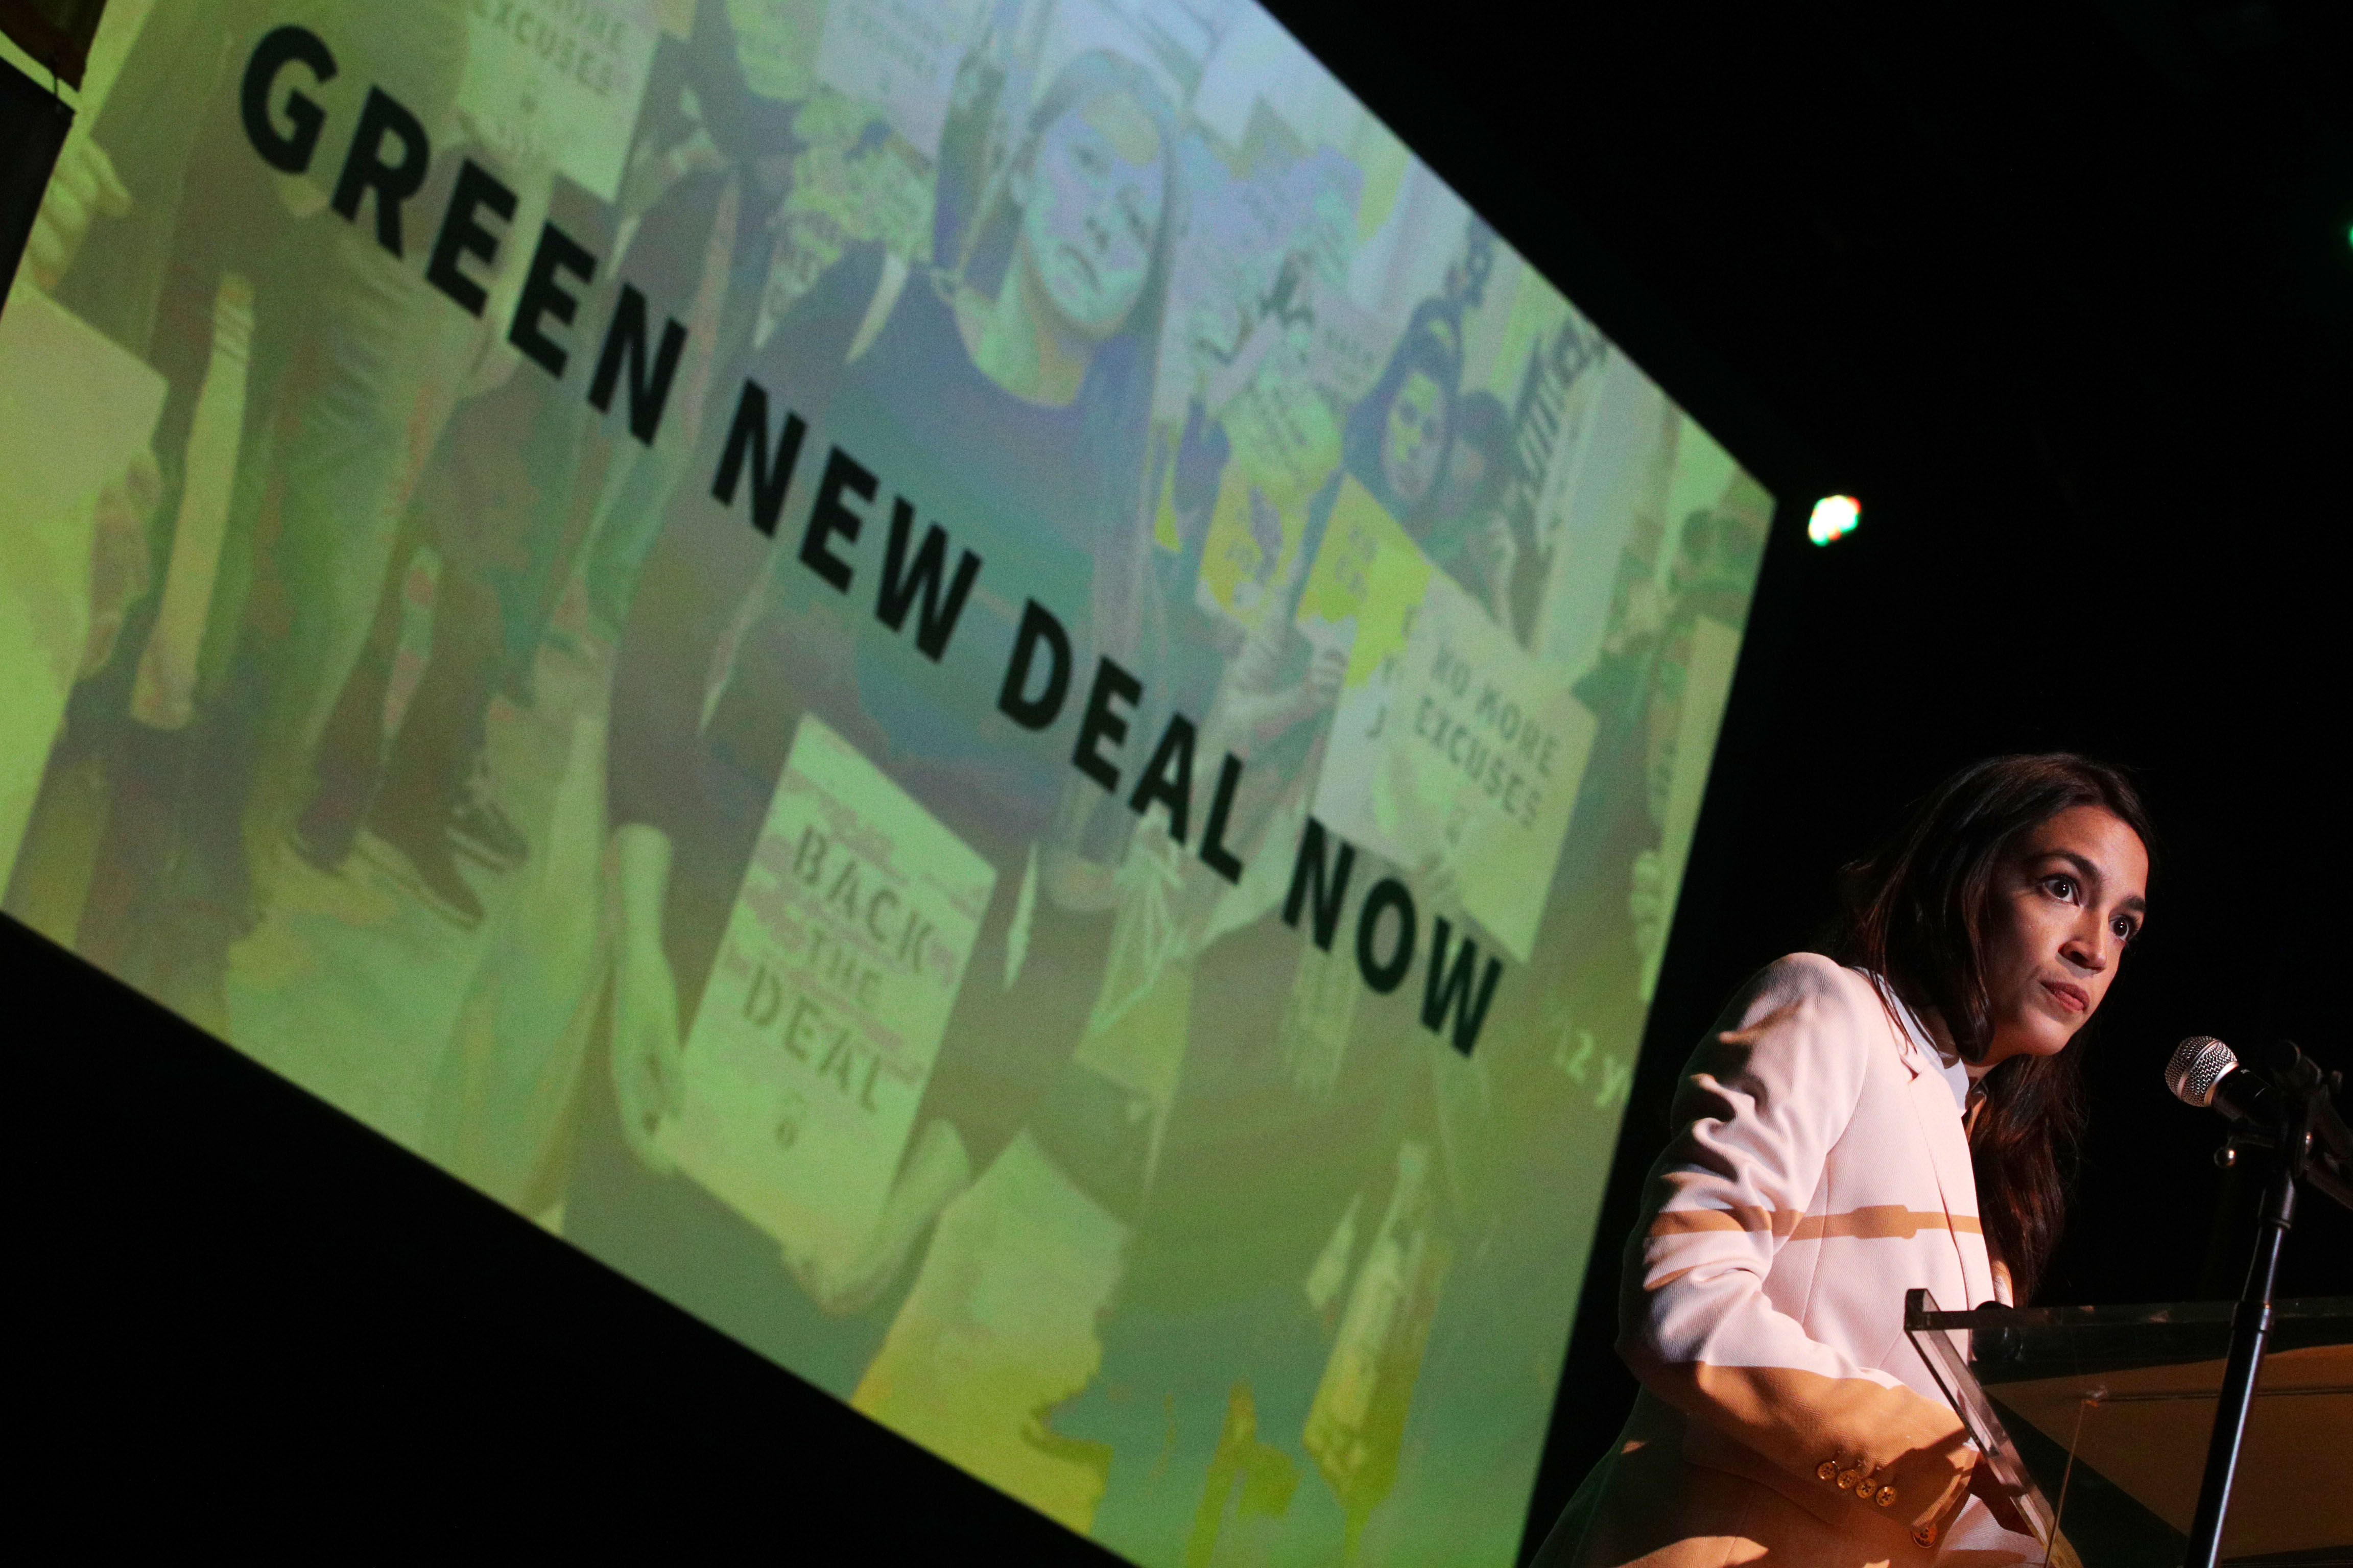 WASHINGTON, DC - MAY 13: U.S. Rep. Alexandria Ocasio-Cortez (D-NY) speaks during a rally at Howard University May 13, 2019 in Washington, DC. The Sunrise Movement held an event for the final stop of the "Road to a Green New Deal" tour to "explore what the pain of the climate crisis looks like in D.C. and for the country and what the promise of the Green New Deal means." (Photo by Alex Wong/Getty Images)